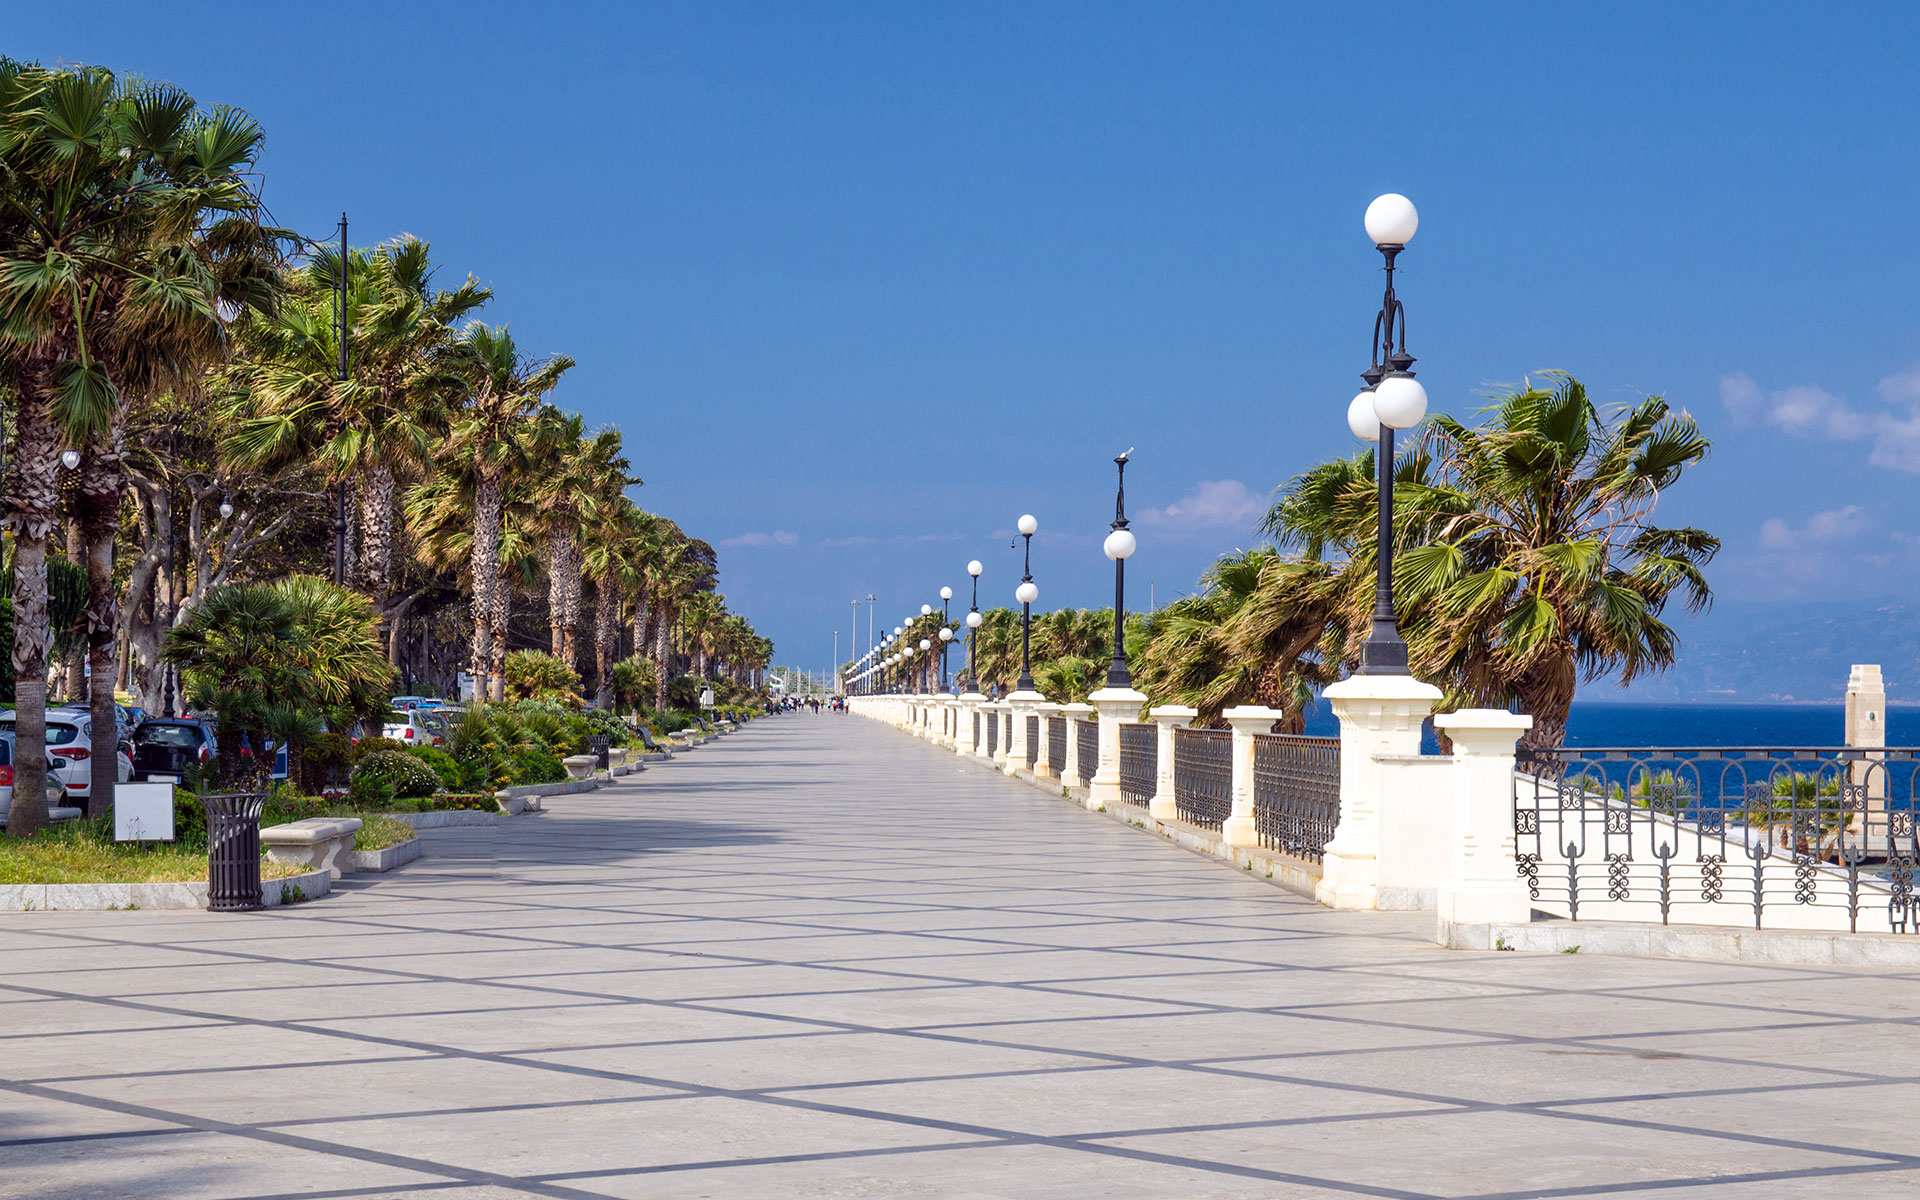 The waterfront promenade at Reggio di Calabria - a town on the toe of mainland Italy which is about to get both fast Frecciarossa and NTV Italo trains to Turin (photo © Antanovich1985 / dreamstime.com).